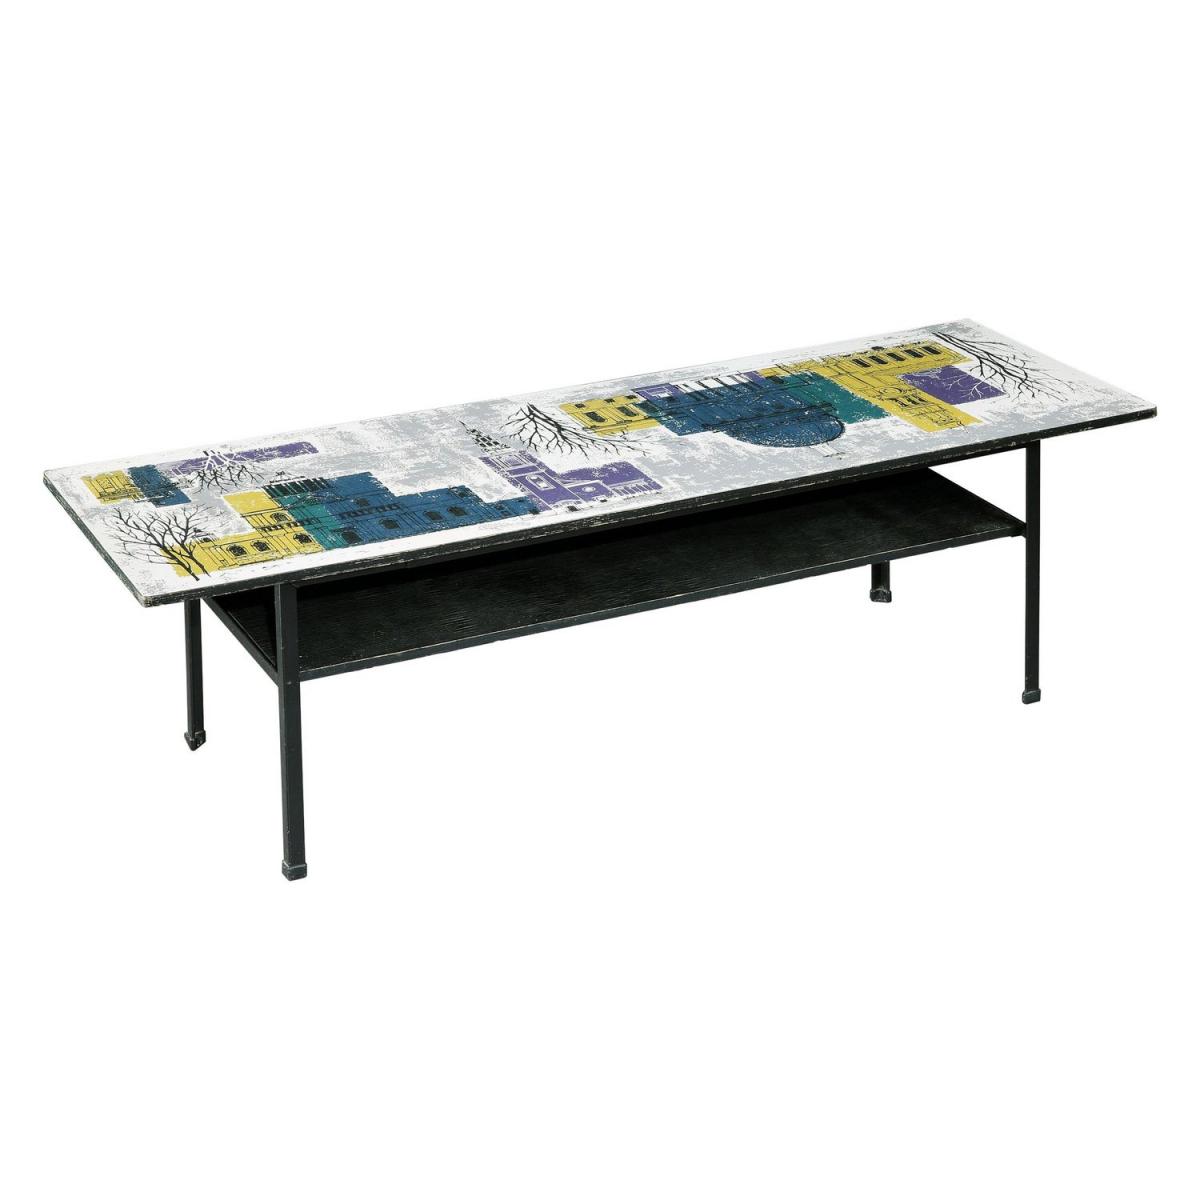 John Piper CH (1903-1992) London Skyline, two-tier coffee table by Myer |  BADA